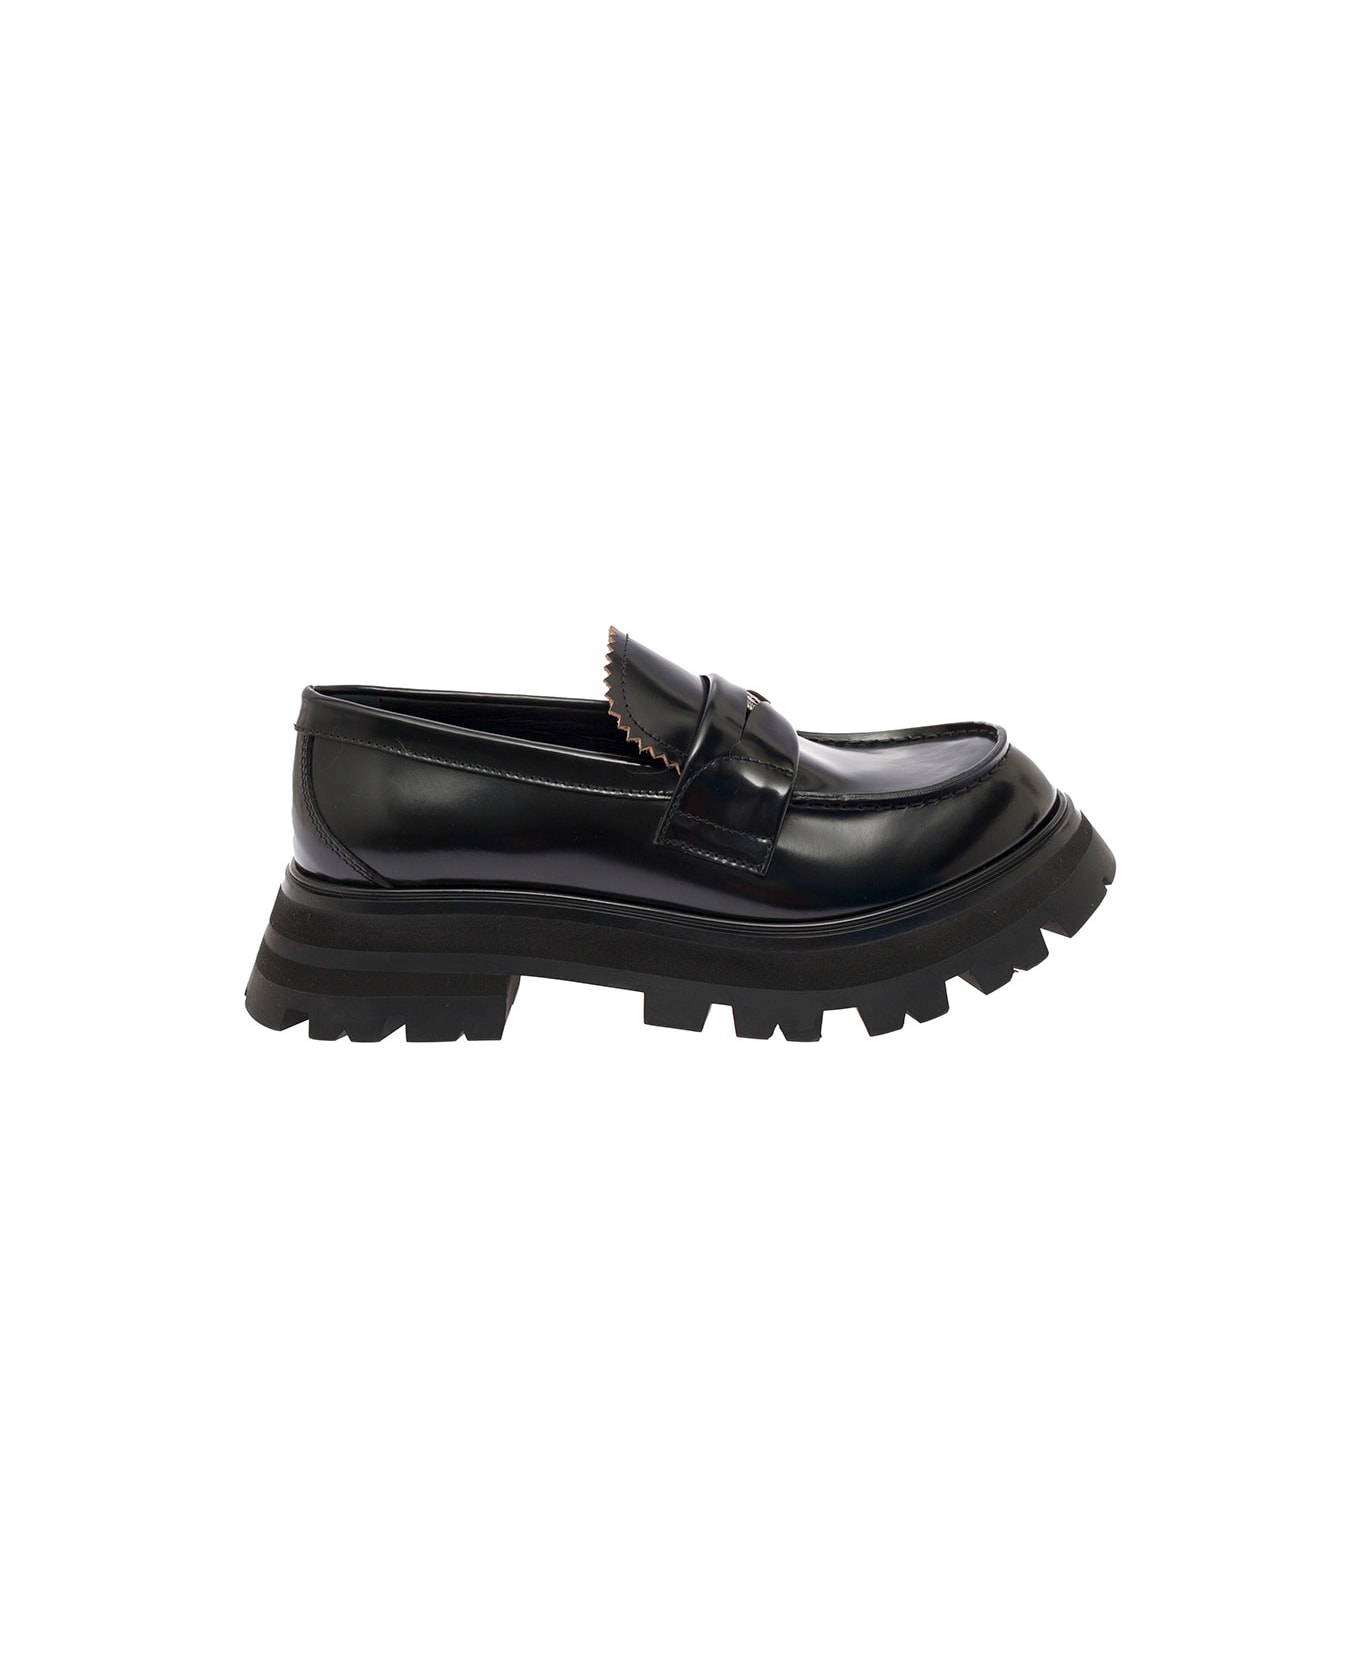 Alexander McQueen Woman's Black Oversize Leather Loafers - Black